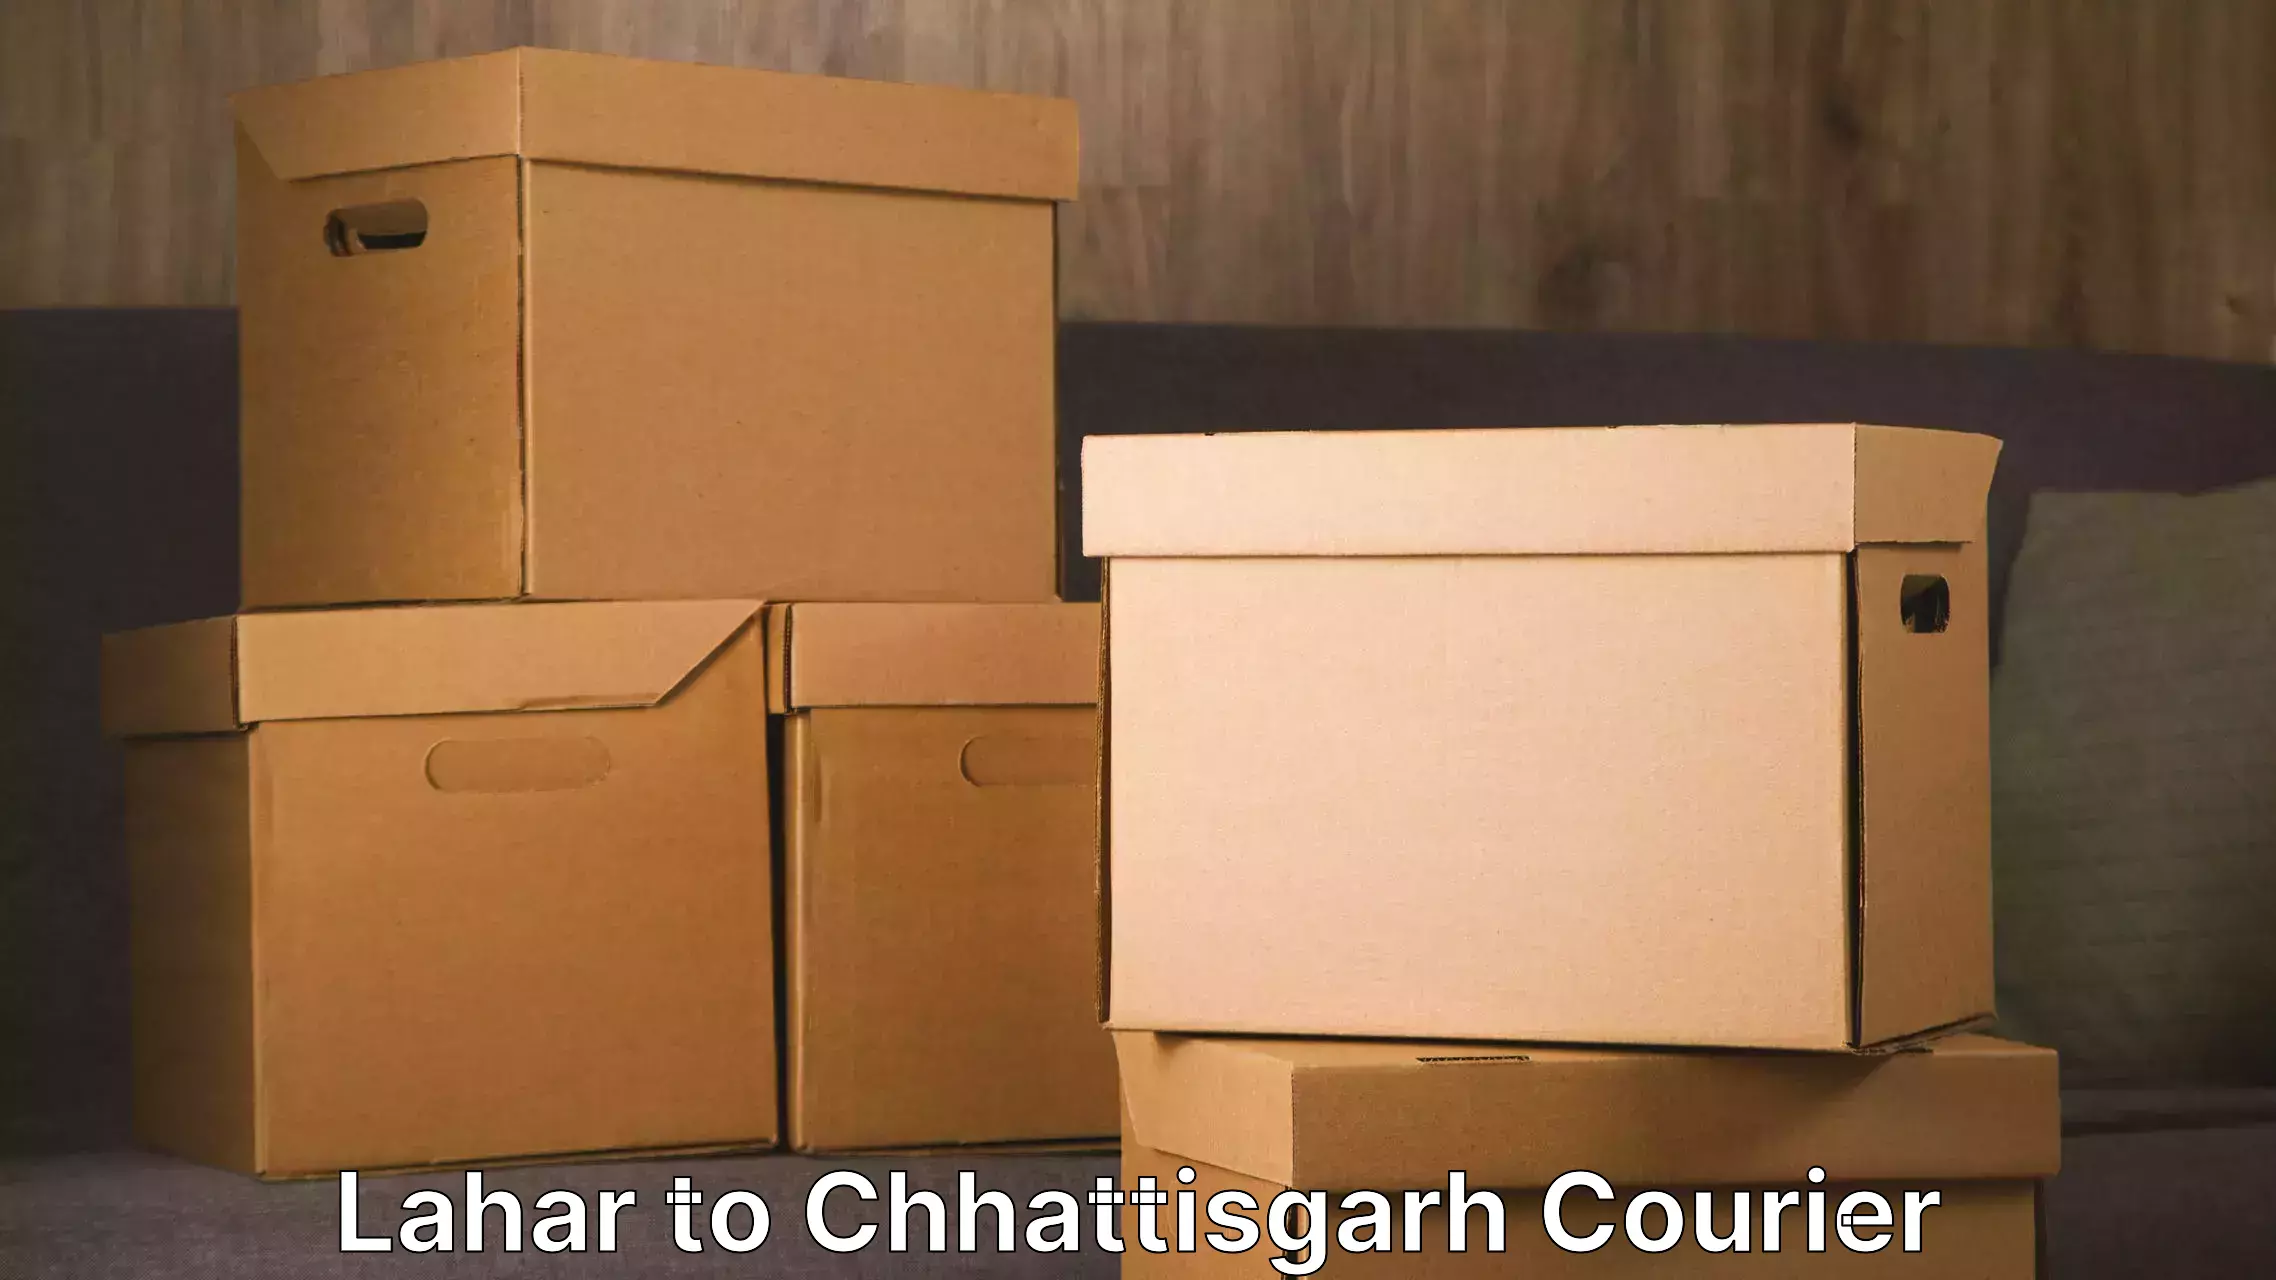 Efficient relocation services Lahar to bagbahra